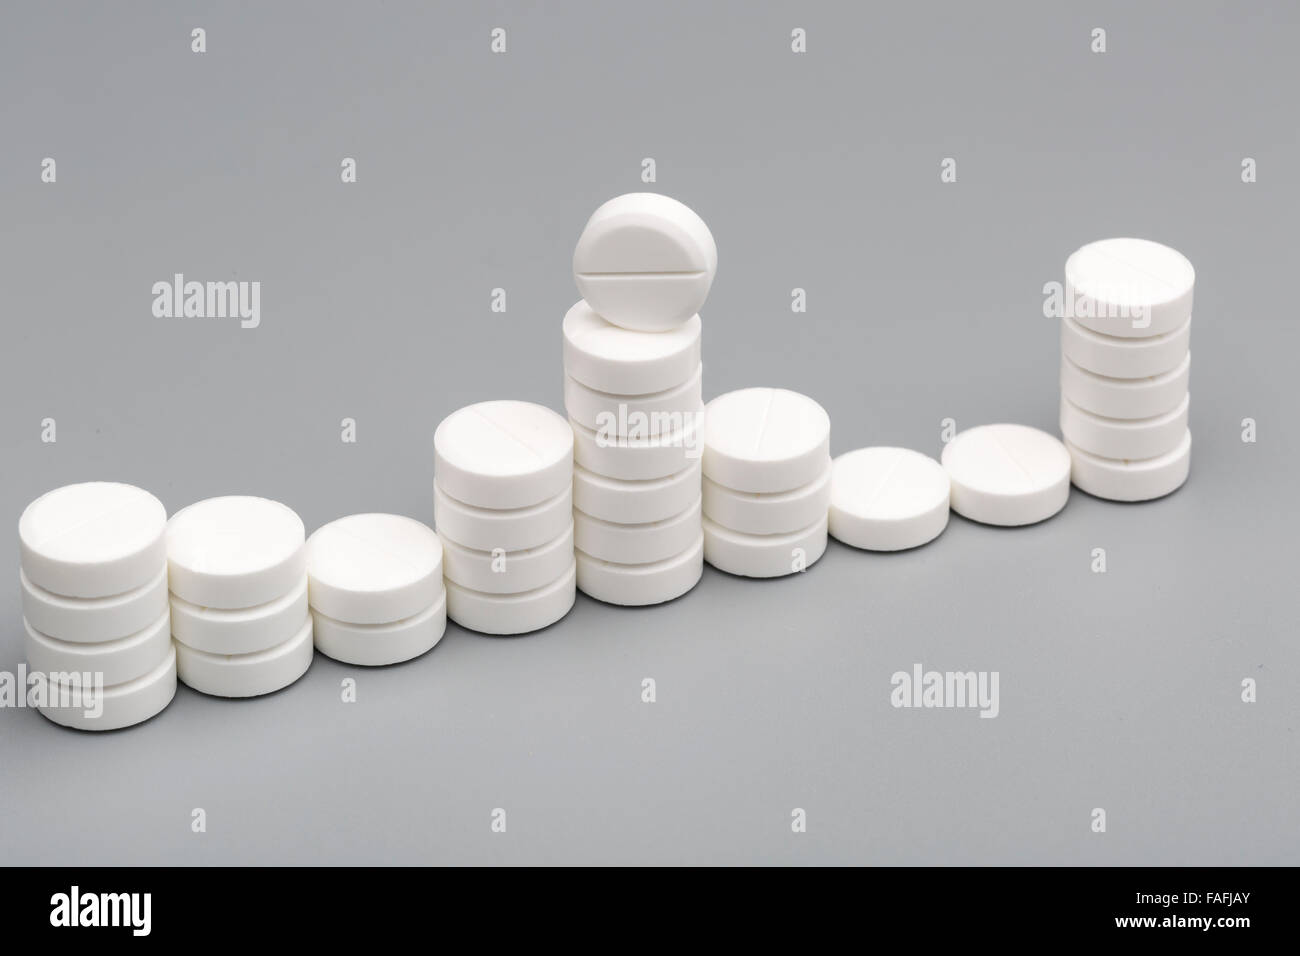 Abstract chart of white pills on a gray background Stock Photo